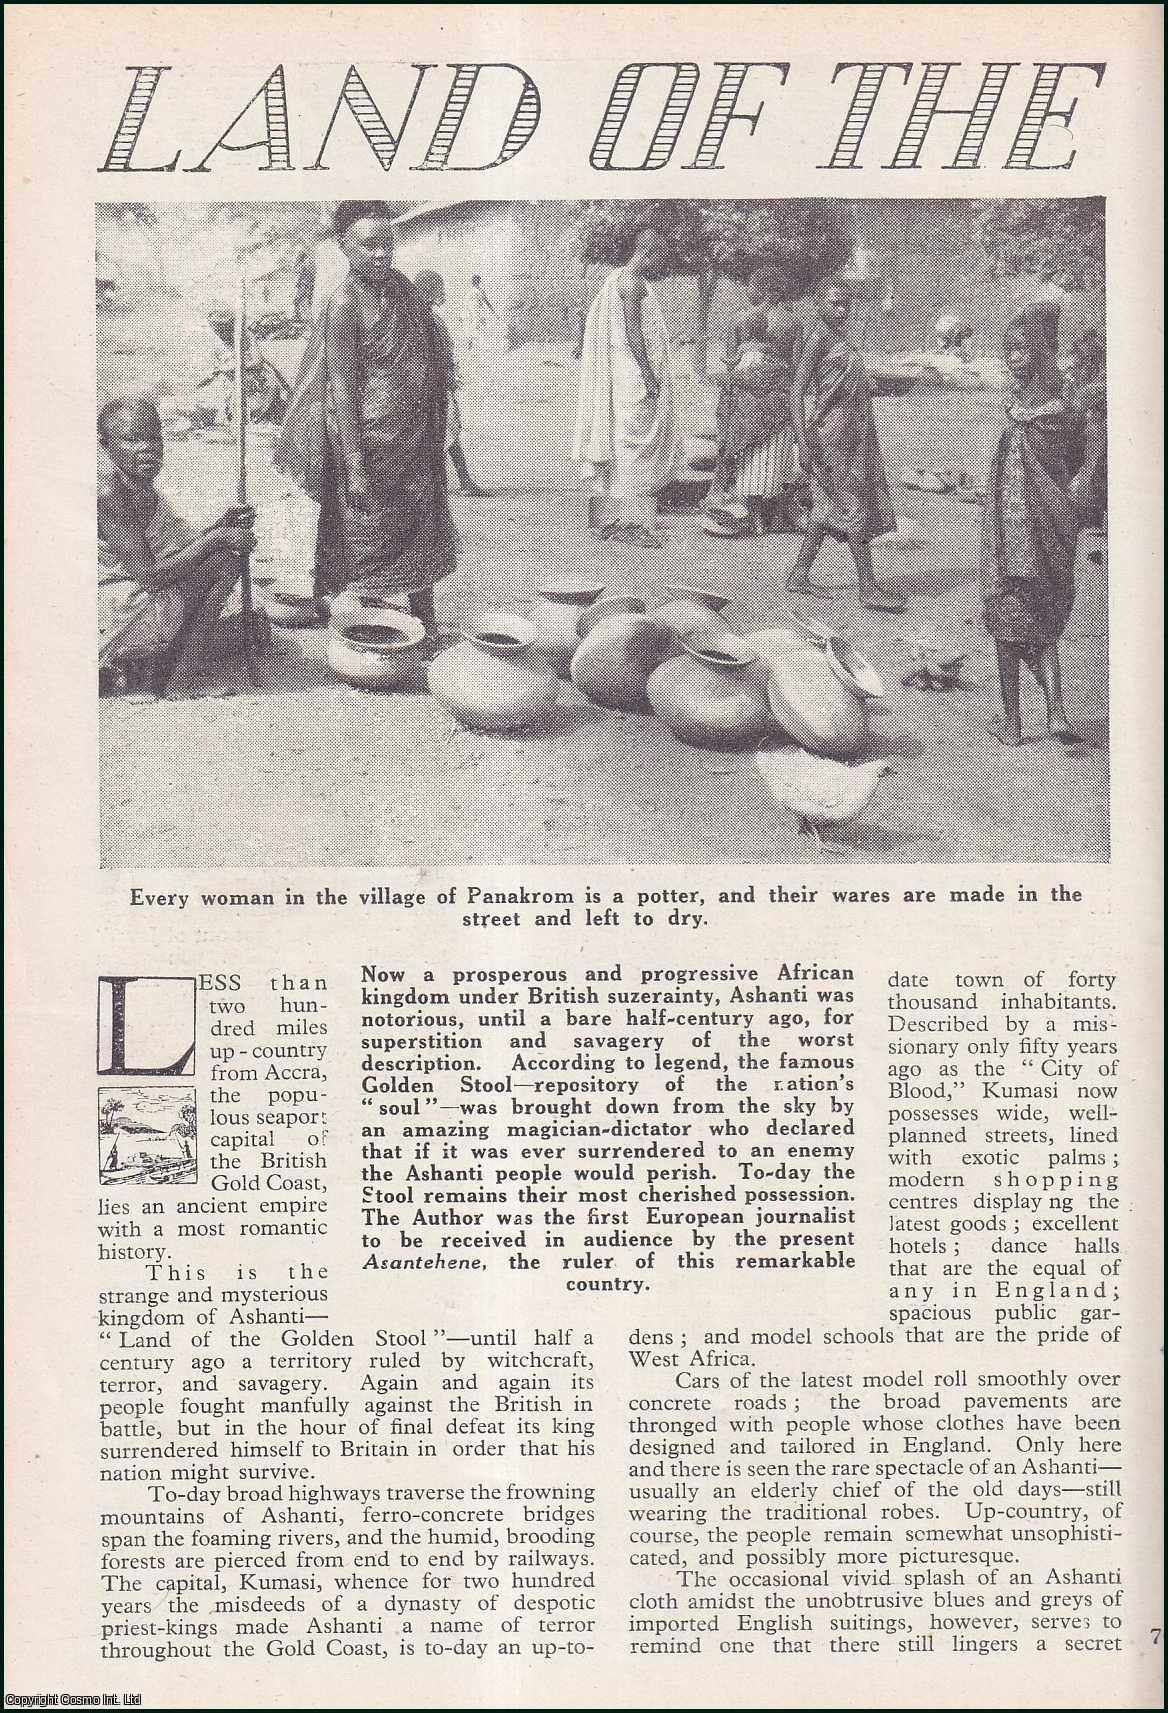 V.A.I. Turner - Land of the Golden Stool, in the Kingdom of the Ashanti. An uncommon original article from the Wide World Magazine, 1947.